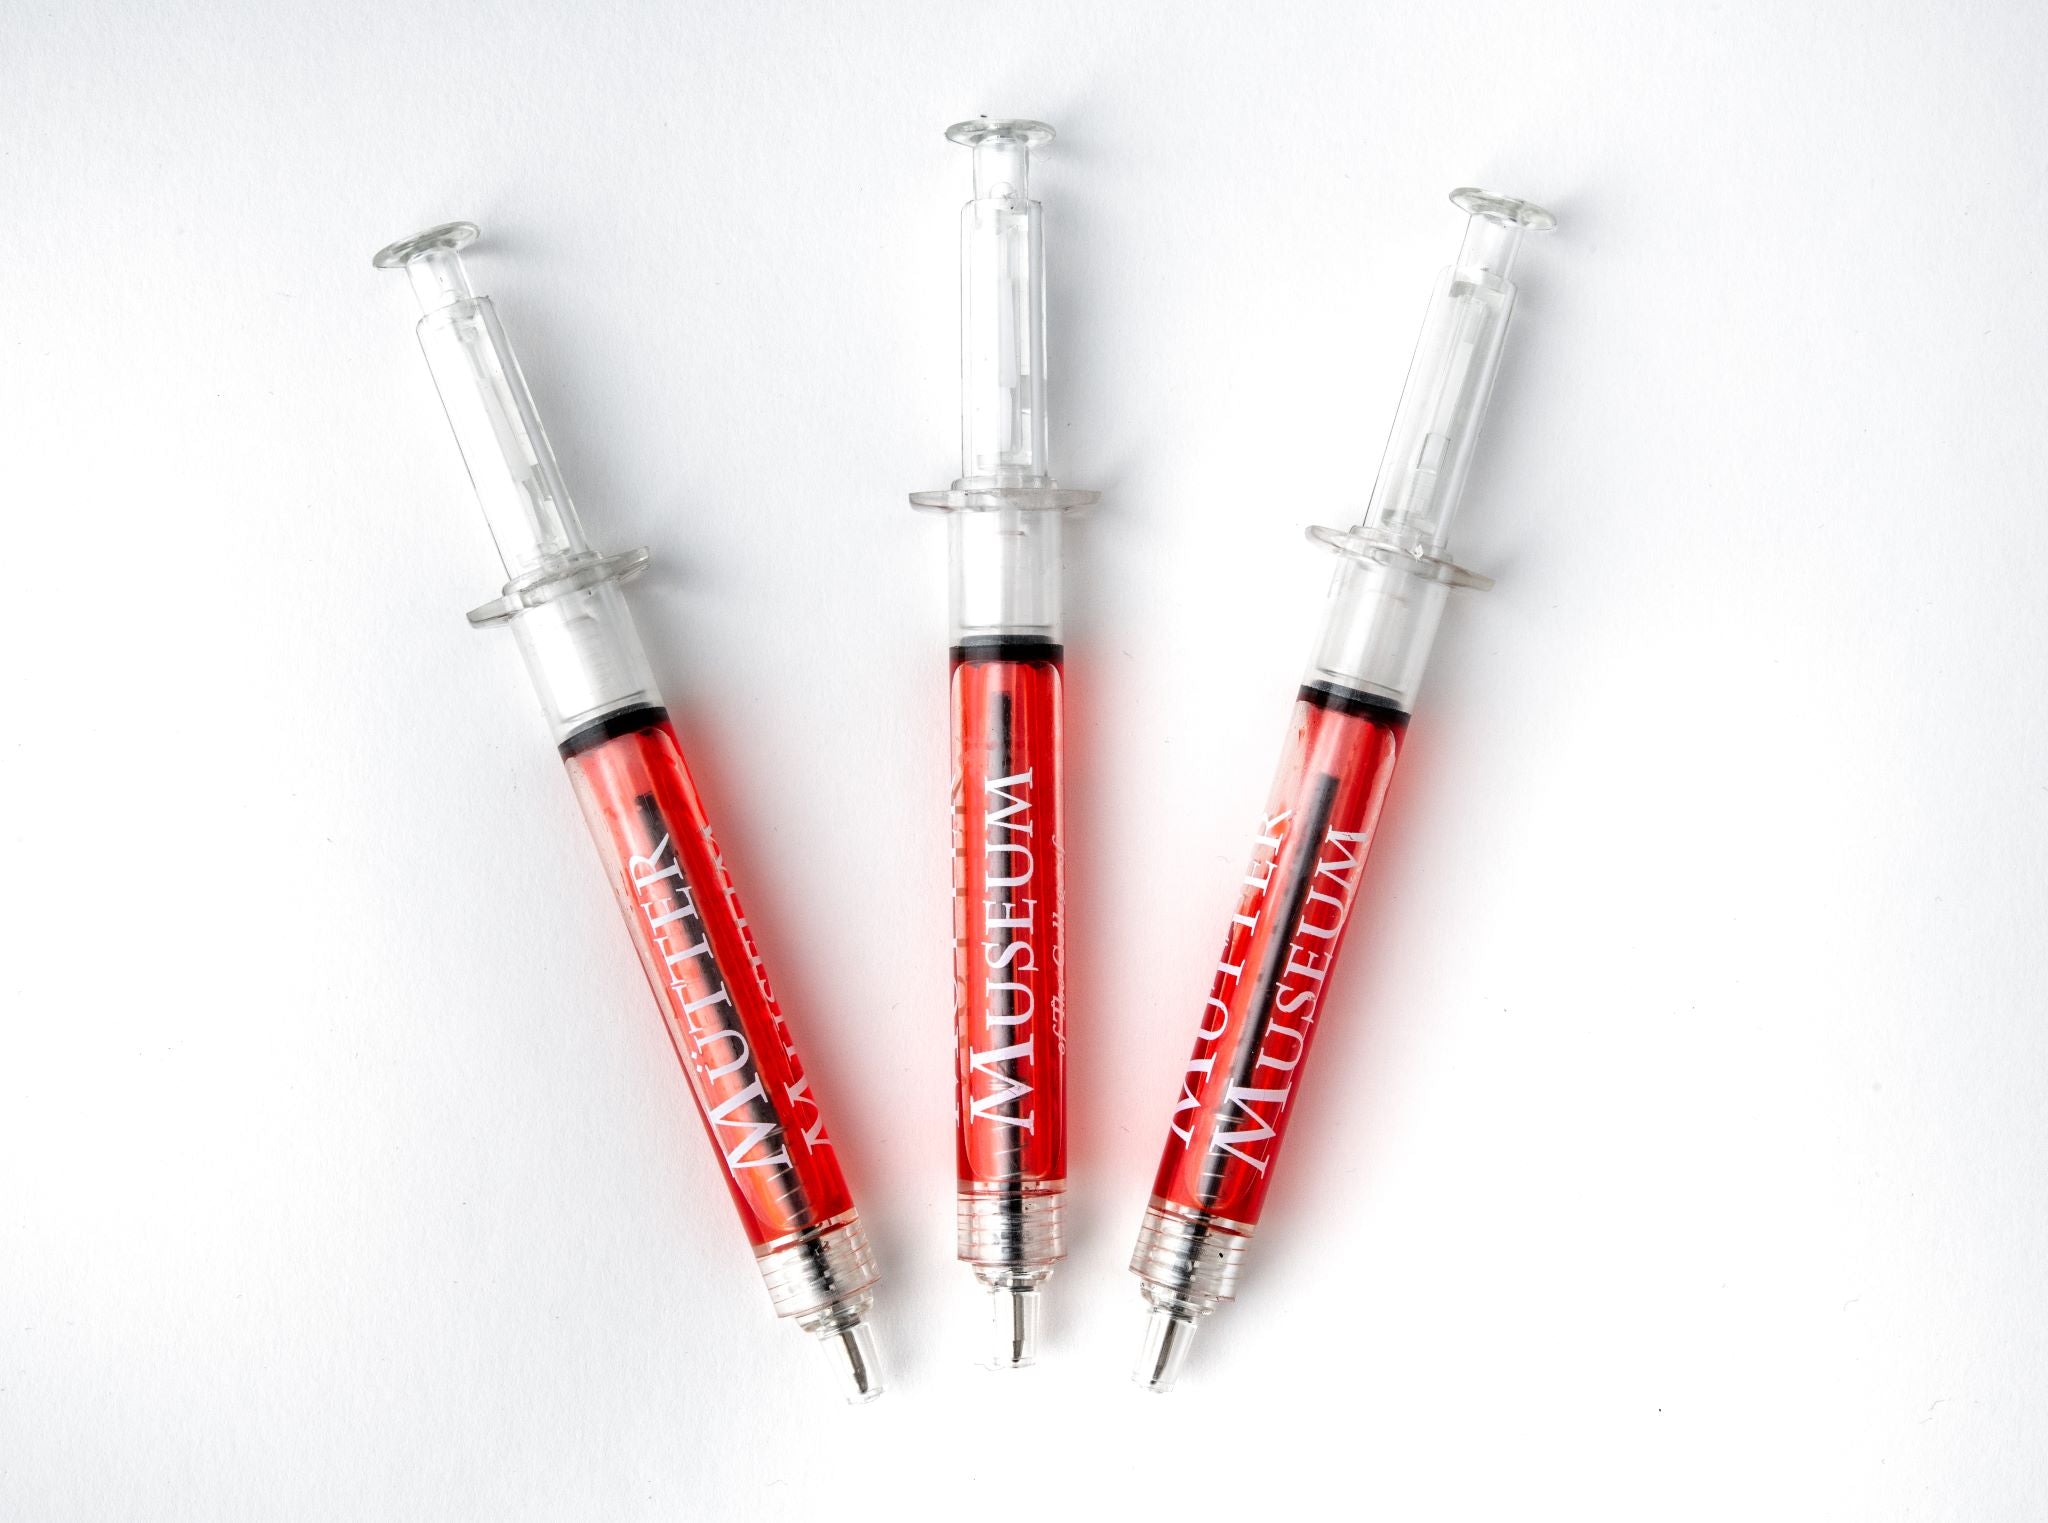 Three plastic pens with a click top in the shape of a syringe. There is a red liquid inside the pen and the Mütter Museum logo is on the barrel.